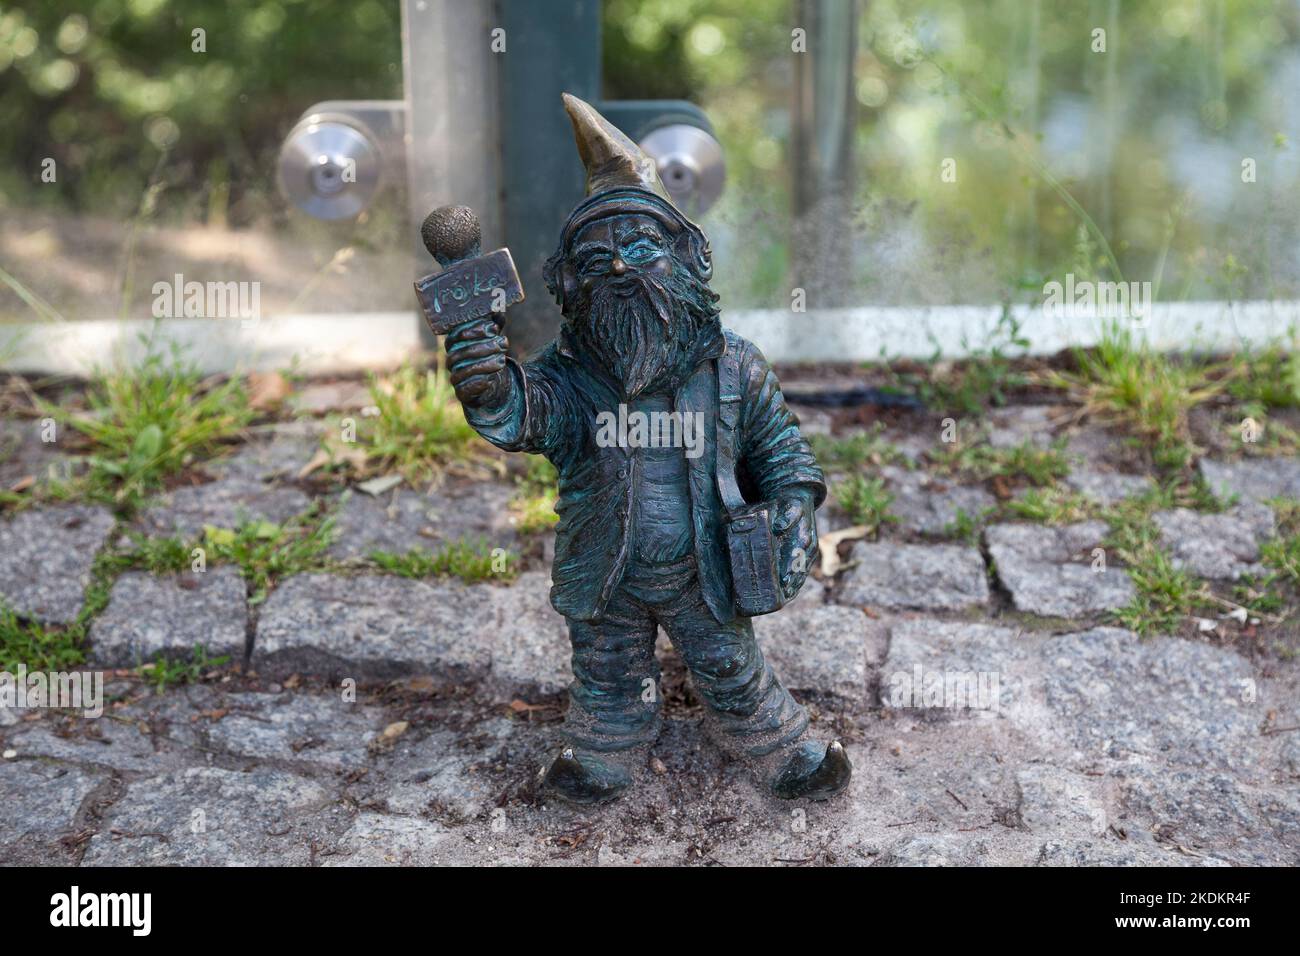 Wroclaw, Poland - June 05 2019: One of the hundreds of Wroclaw’s gnomes (Polish: krasnale) in the city center. They are small figurines (20-30 cm) con Stock Photo